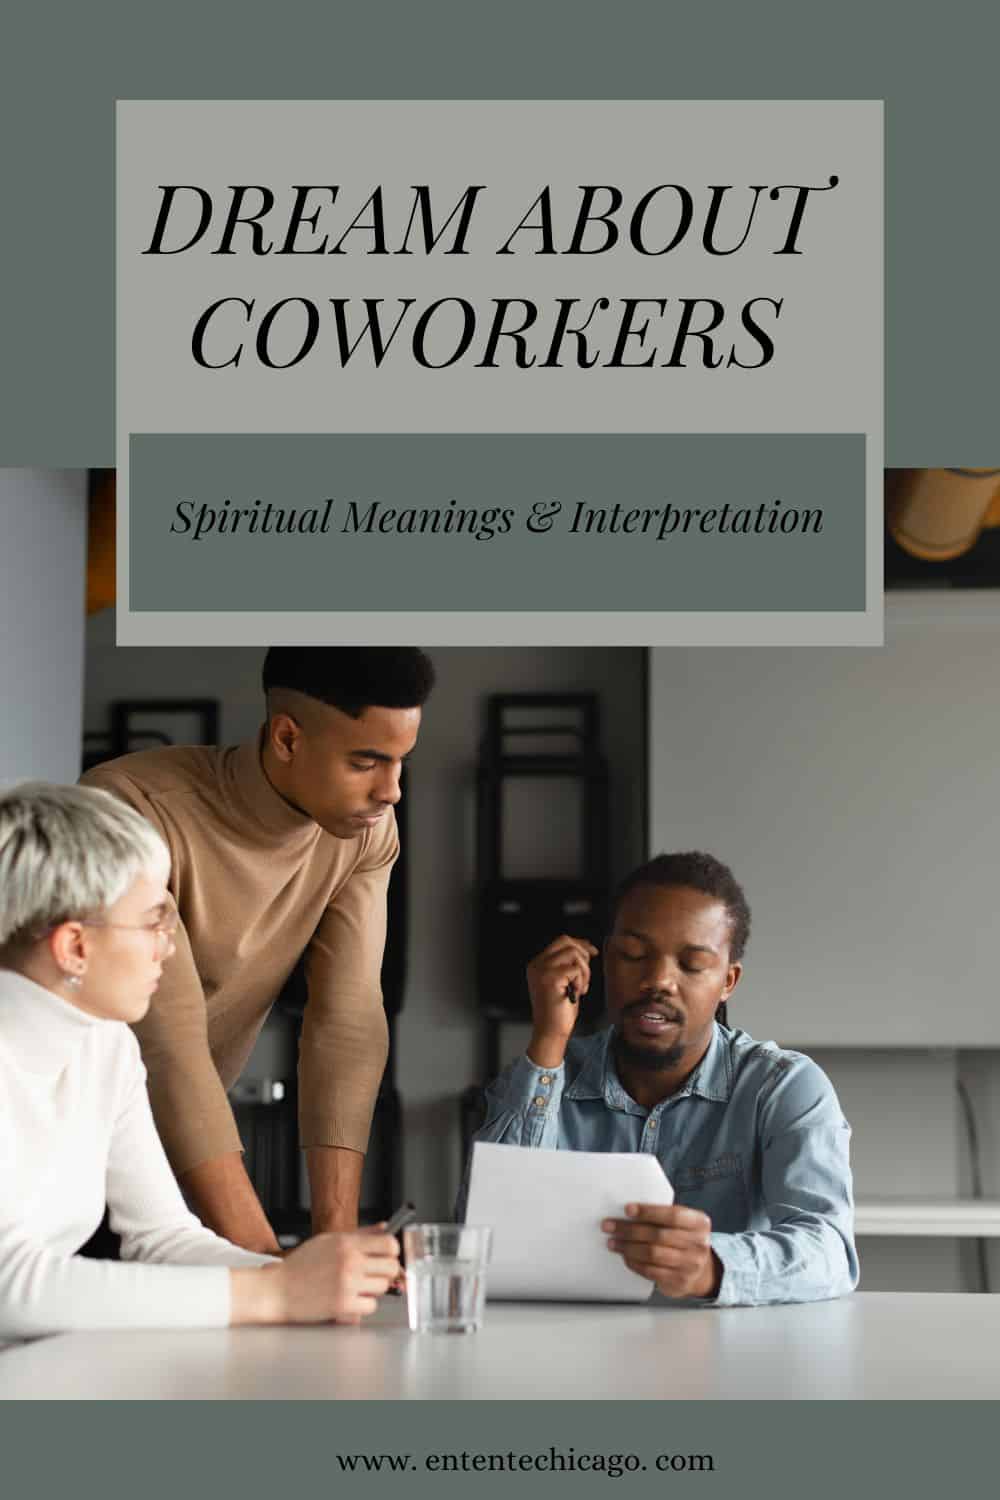 Dream About Coworkers (Spiritual Meanings & Interpretation)